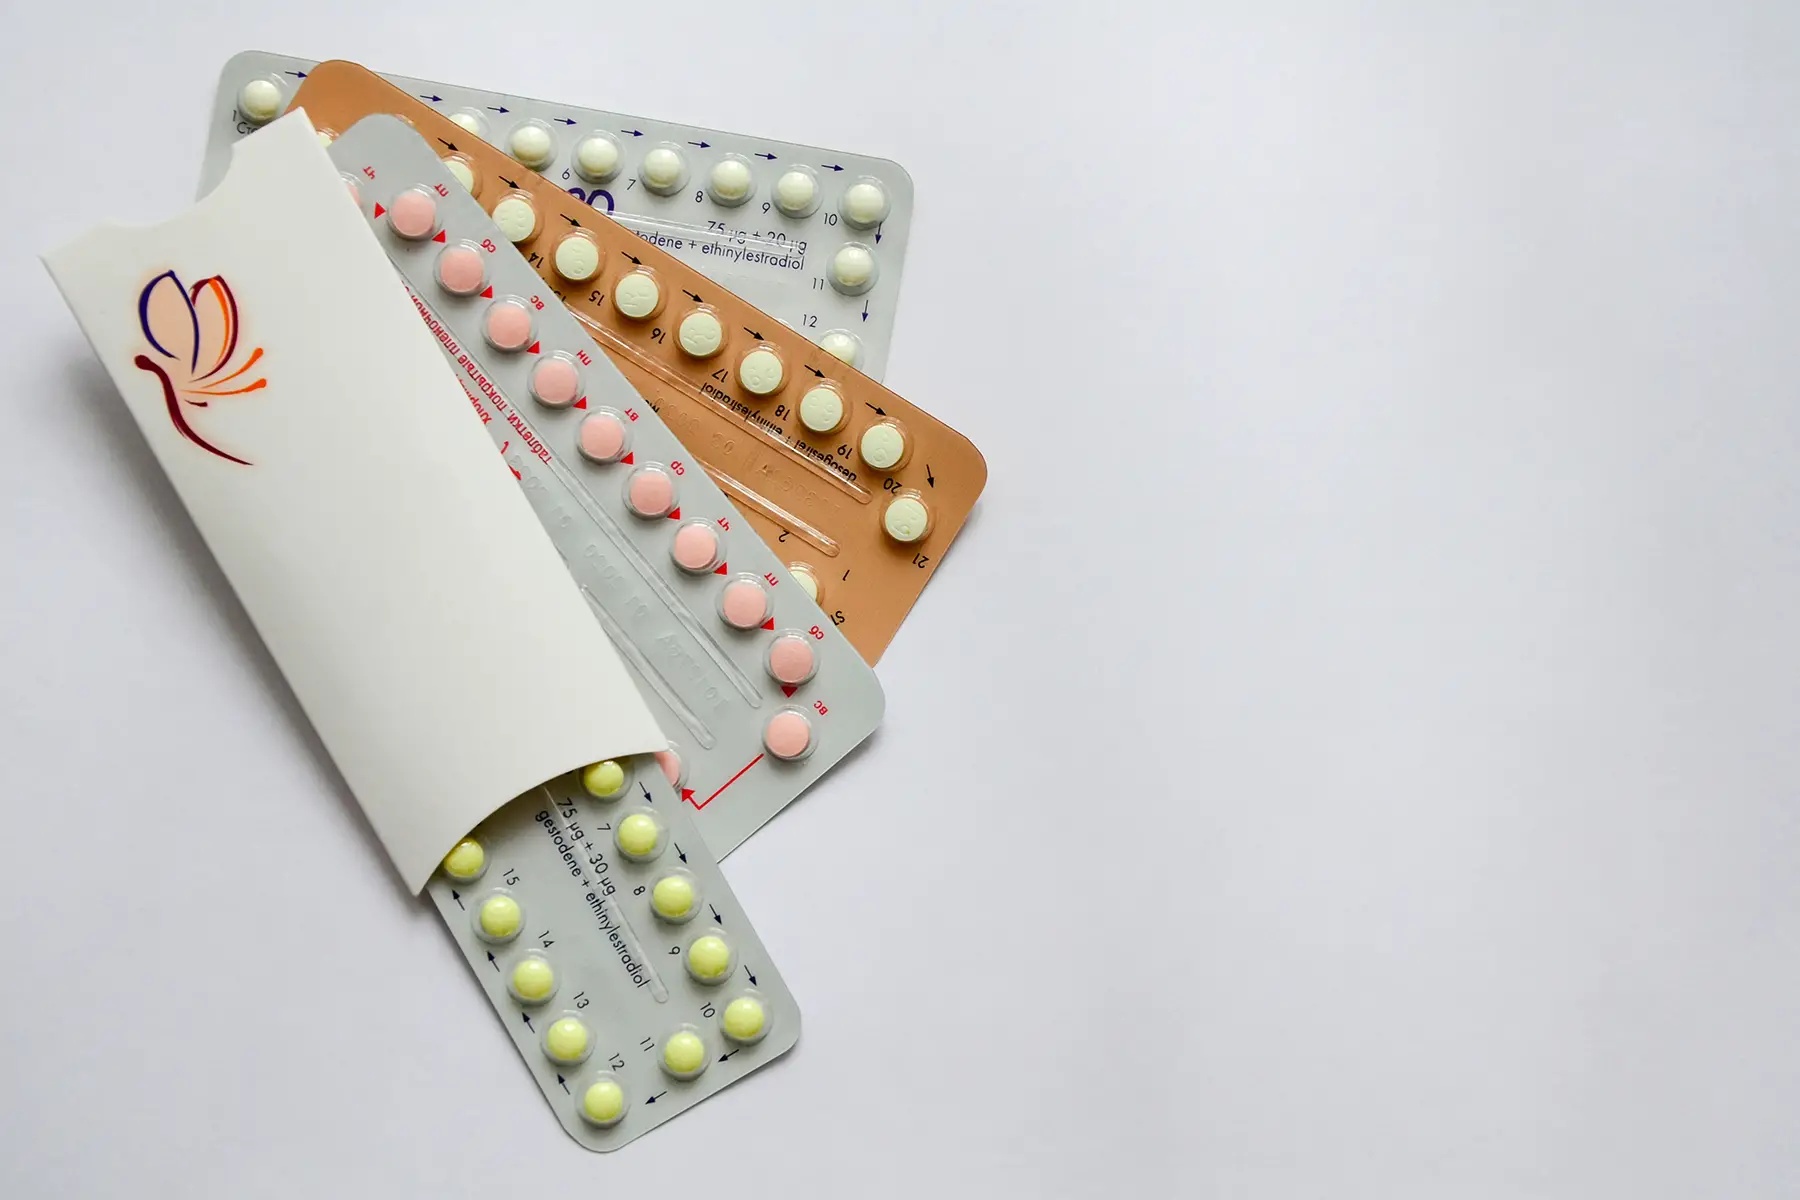 Birth control pills in pastel-colored blister packs